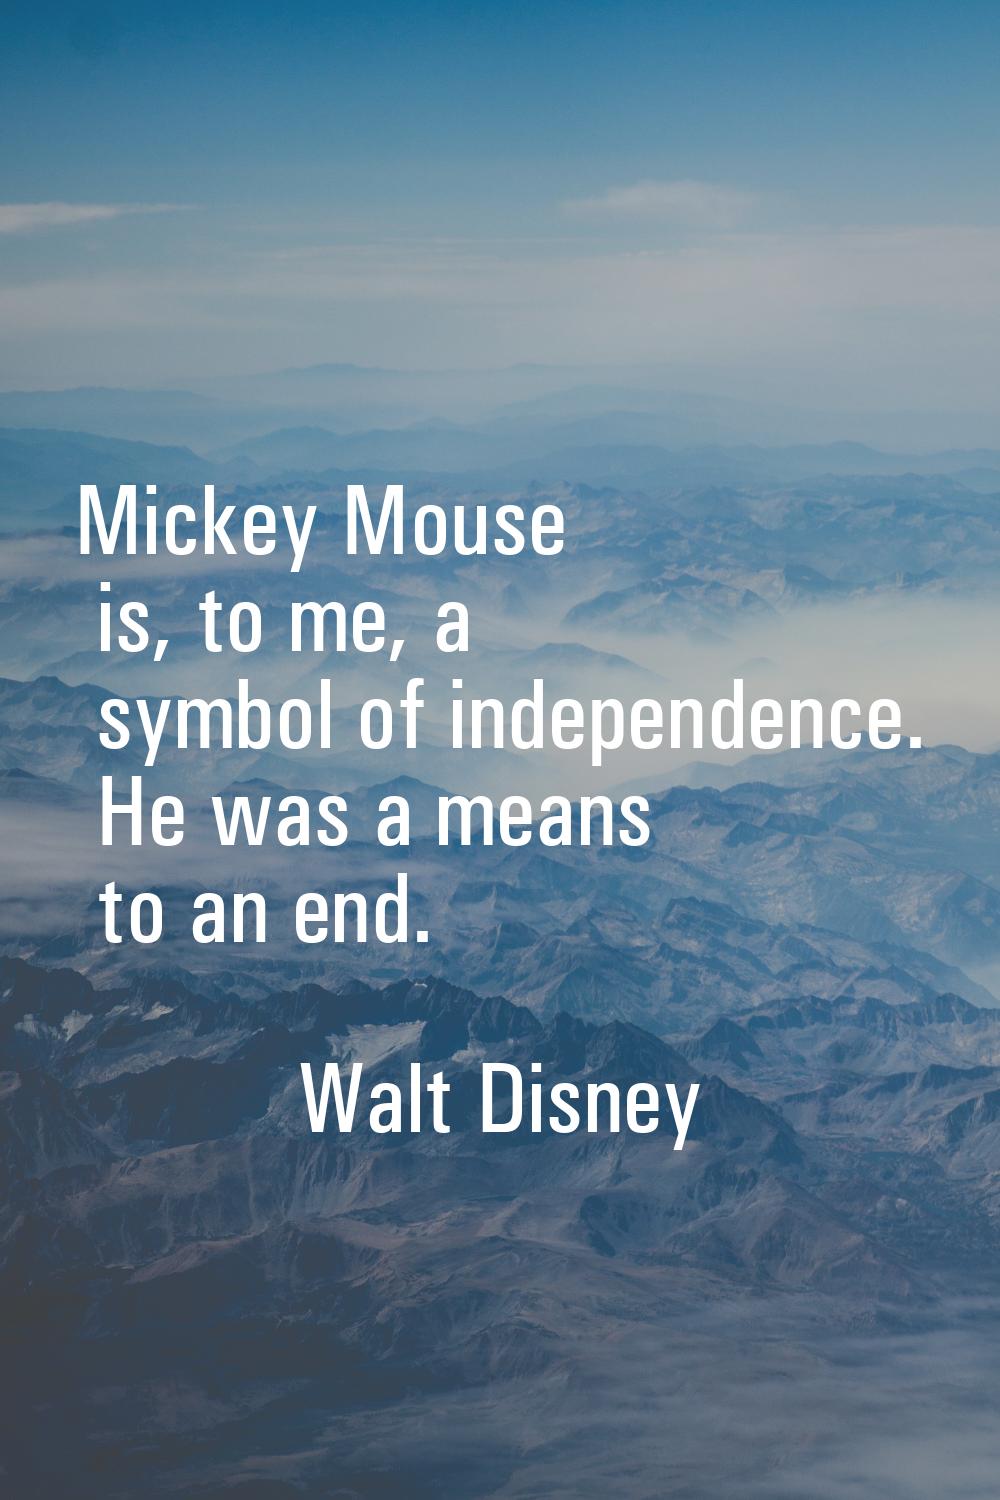 Mickey Mouse is, to me, a symbol of independence. He was a means to an end.